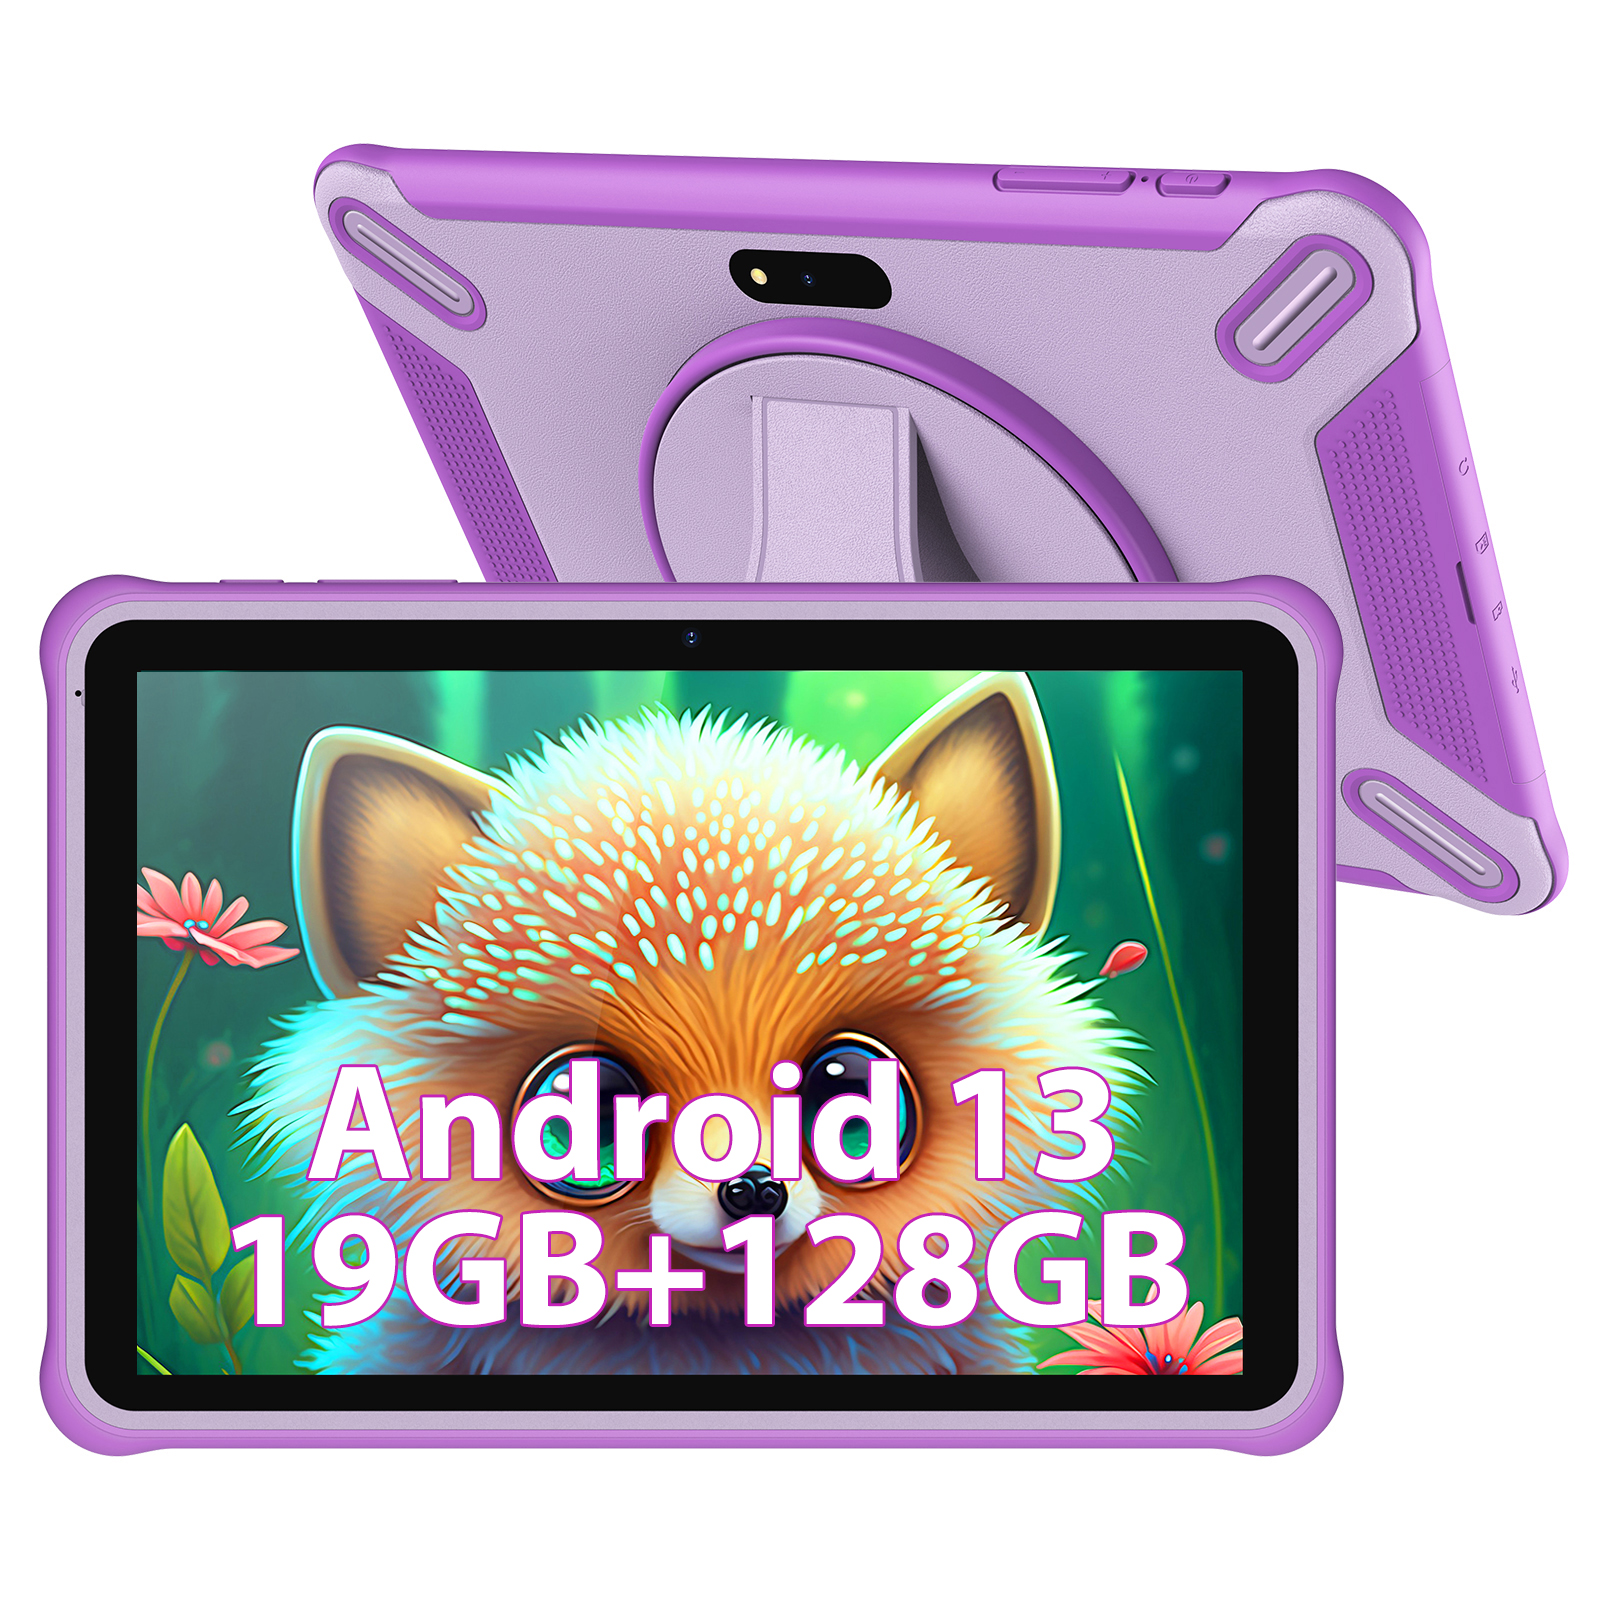 Tablette YOTOPT 10 Pouces Android 13, Octa Core 4Go RAM, 64Go ROM